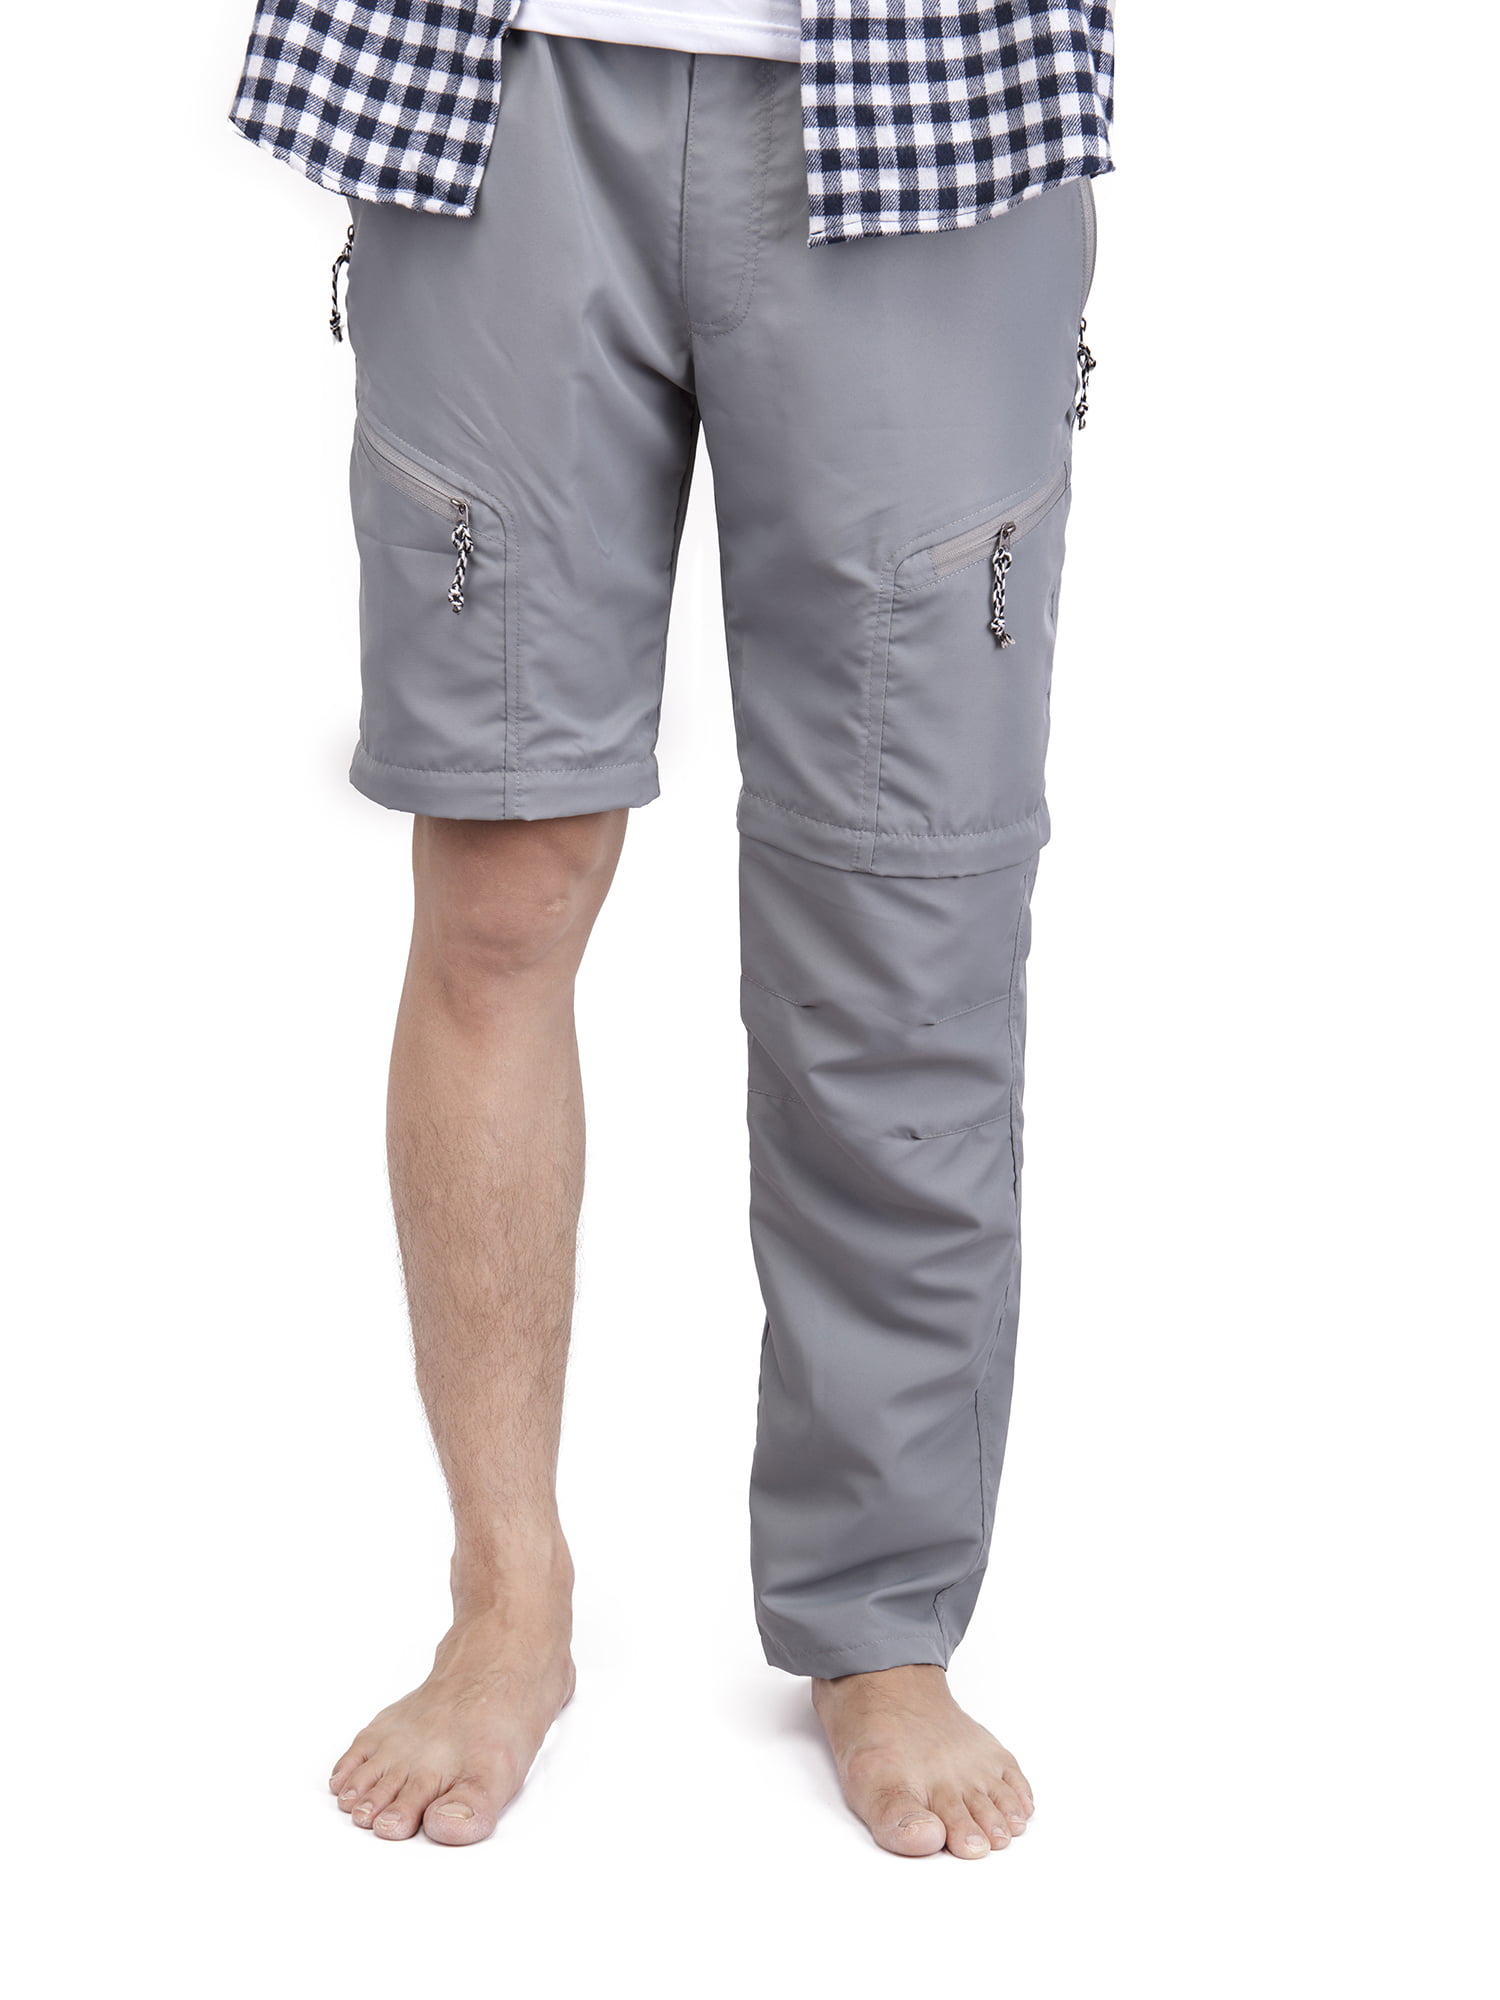 LELINTA Men's Outdoor Anytime Quick Dry 